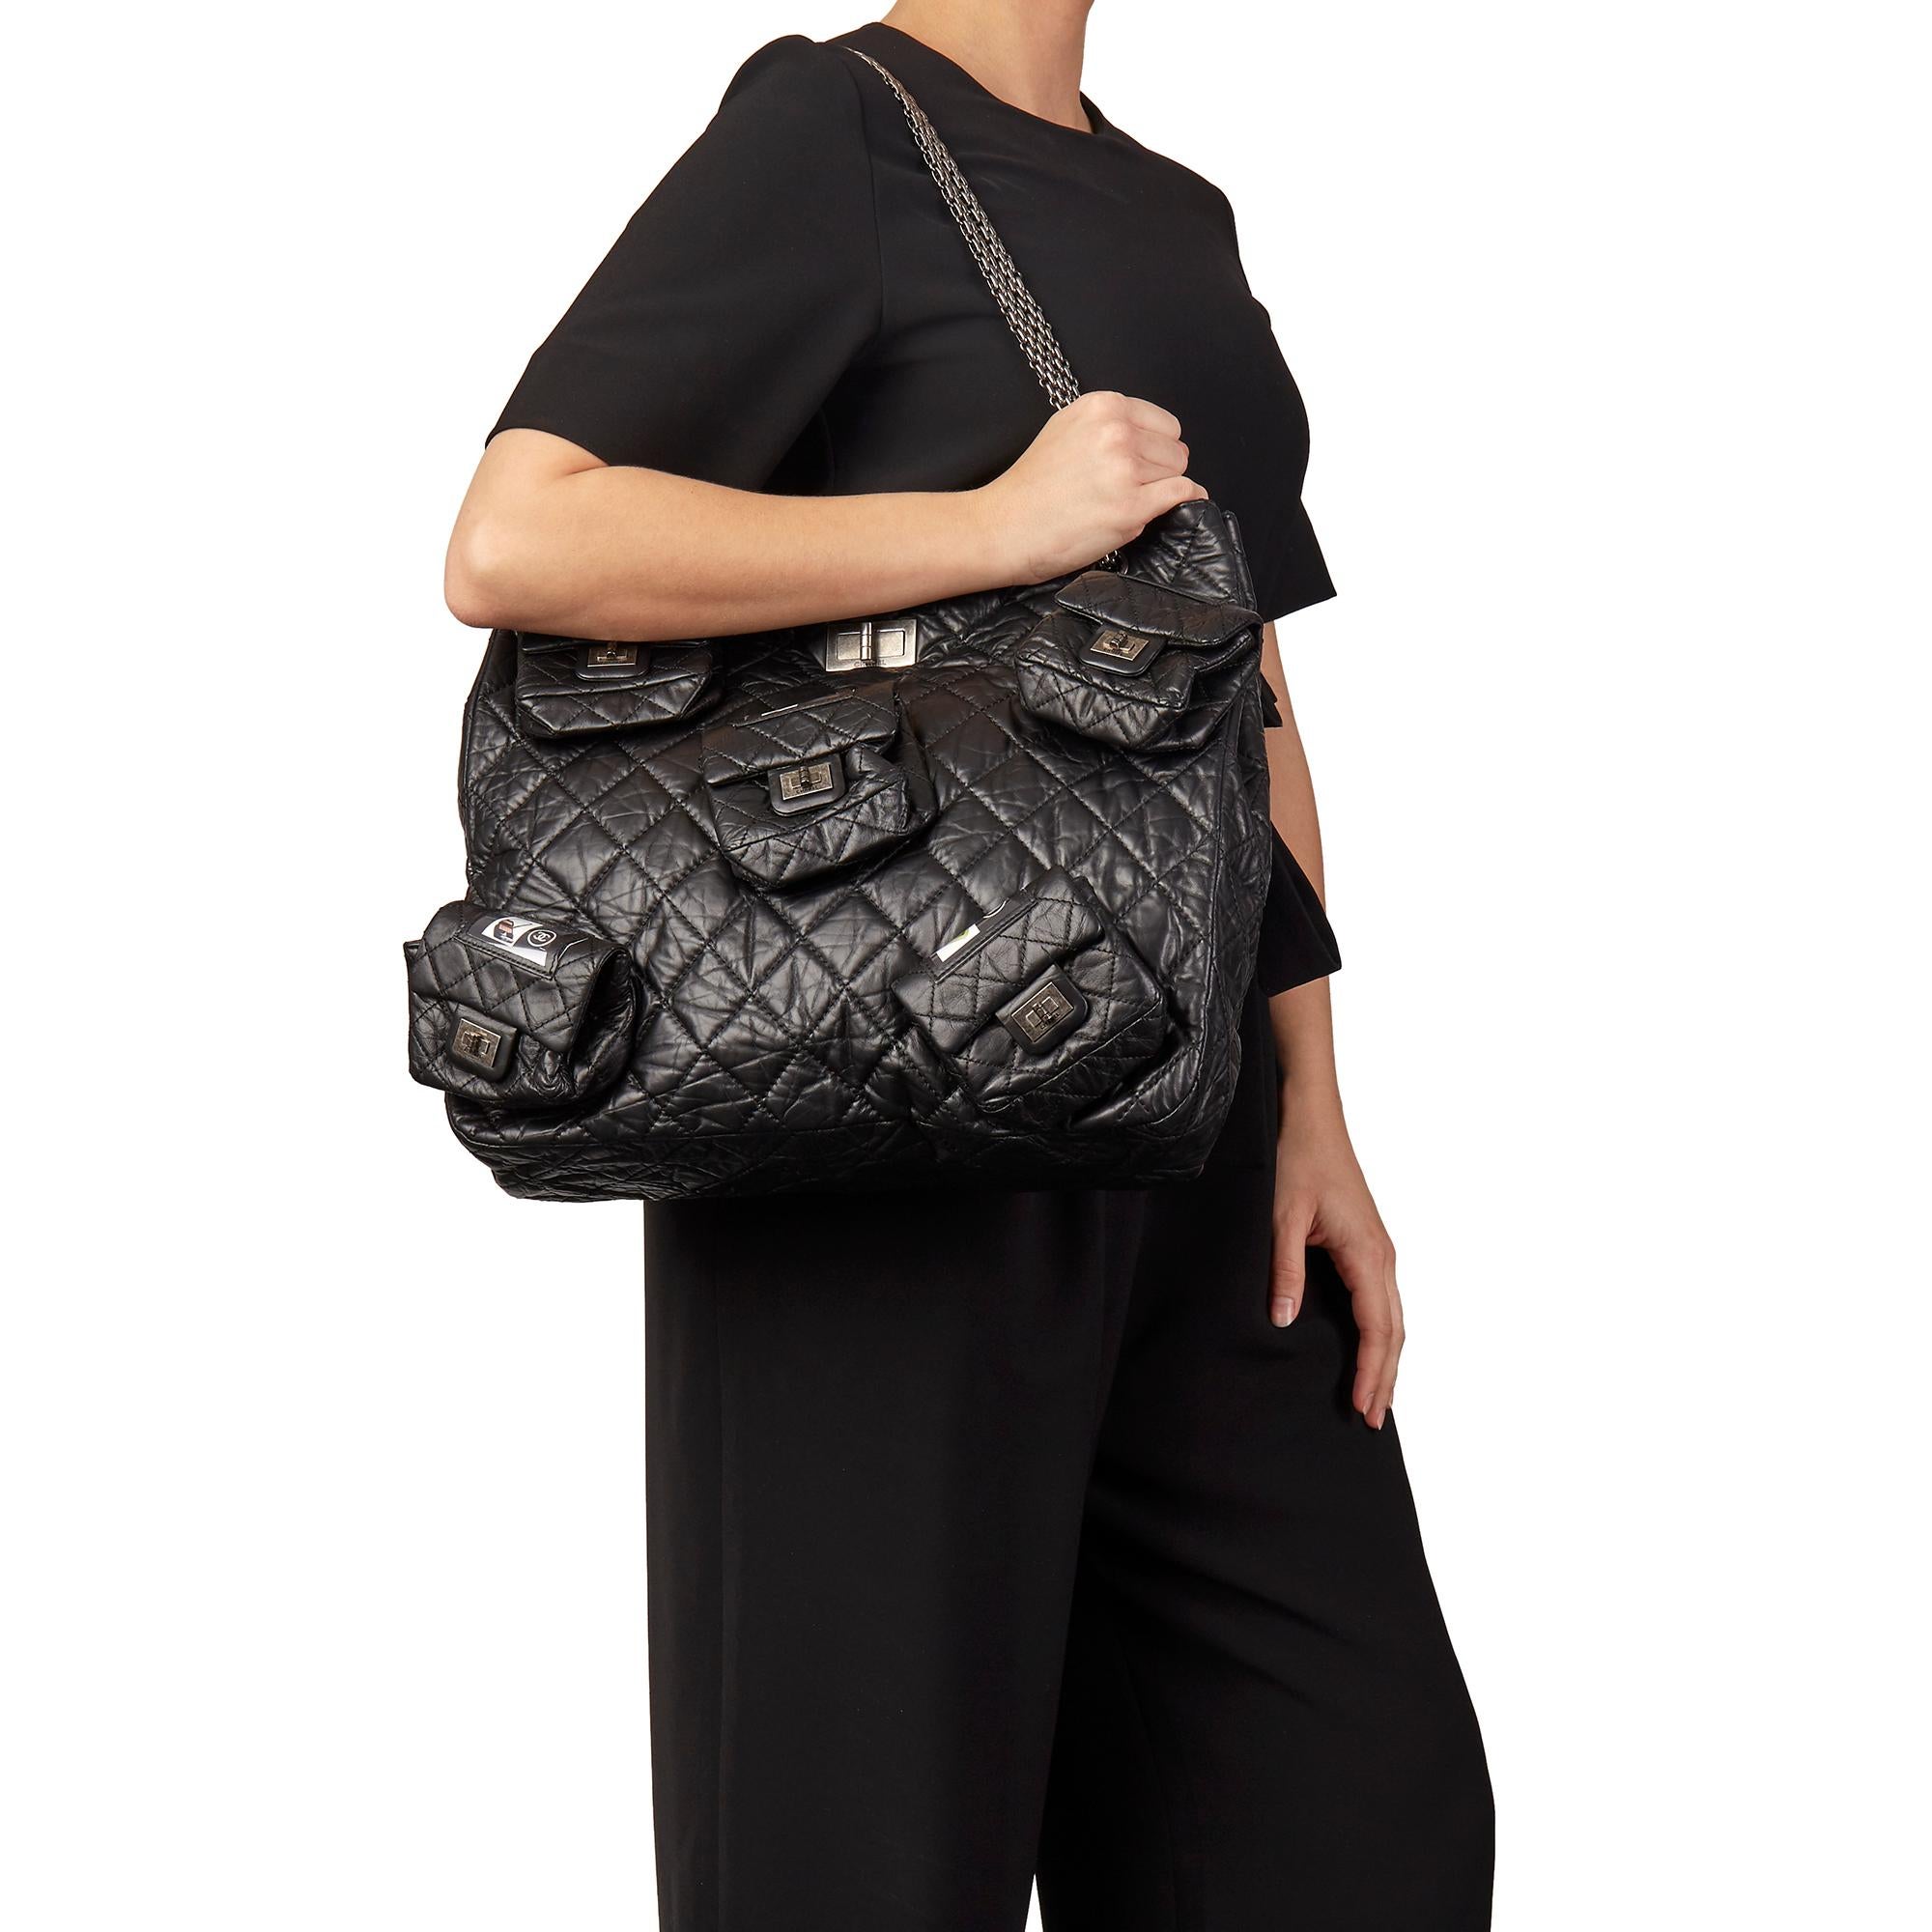 CHANEL
Black Quilted Aged Calfskin Leather 5 Pocket Reissue Shoulder Bag 

Xupes Reference: HB3163
Serial Number: 12293824
Age (Circa): 2009
Accompanied By: Authenticity Card, Removable Pocket Pocket References
Authenticity Details: Serial Sticker,